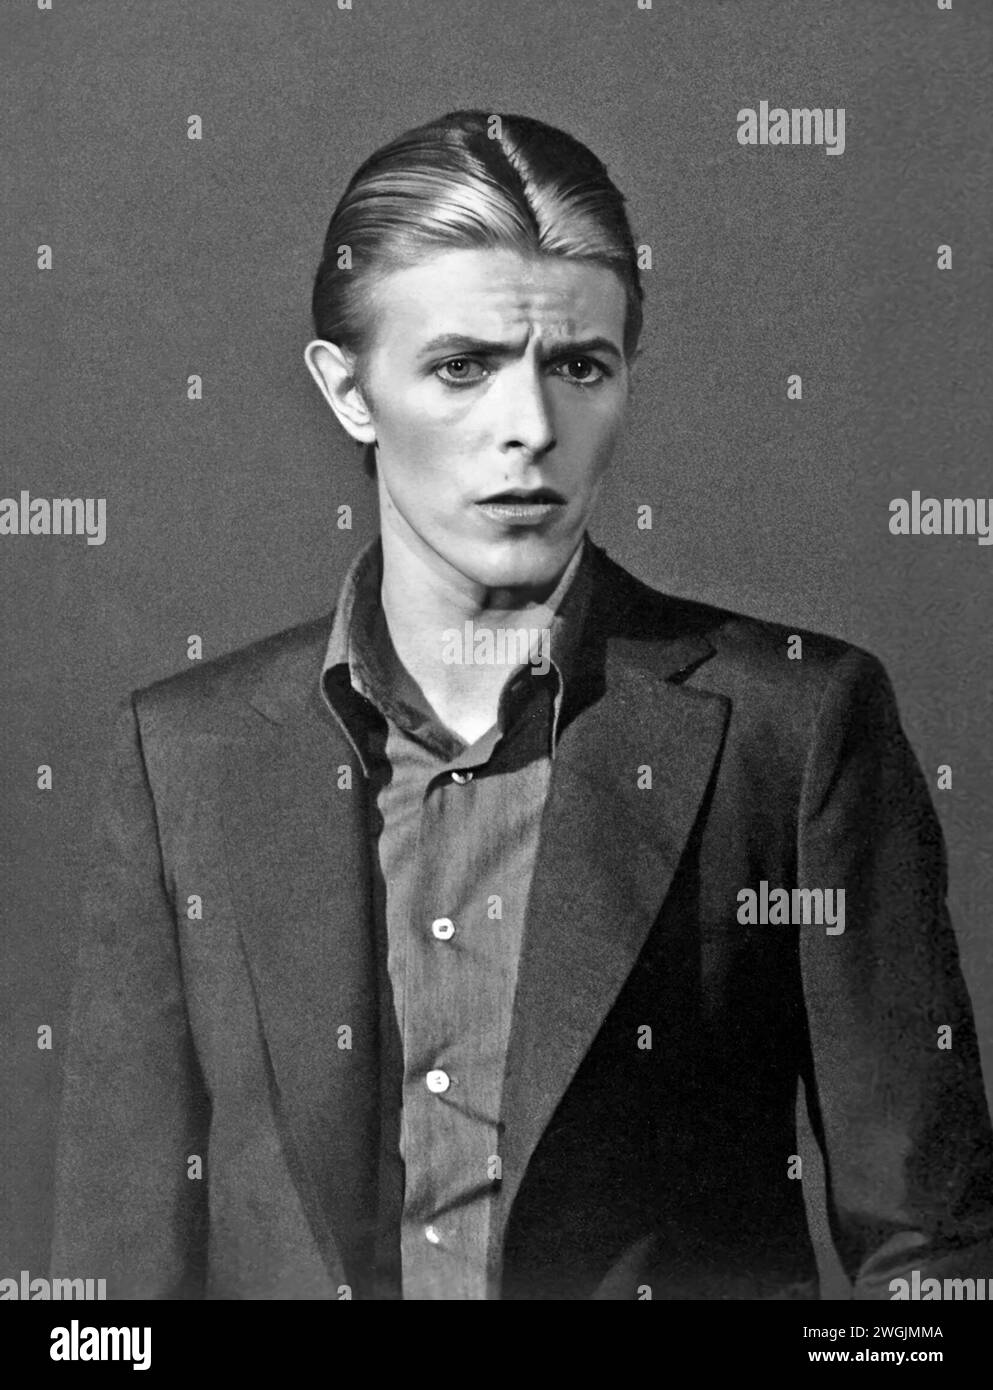 David Bowie. Portrait of the English singer and musician, David Robert Jones (1947-2016) on the Cher variety show in 1975 Stock Photo